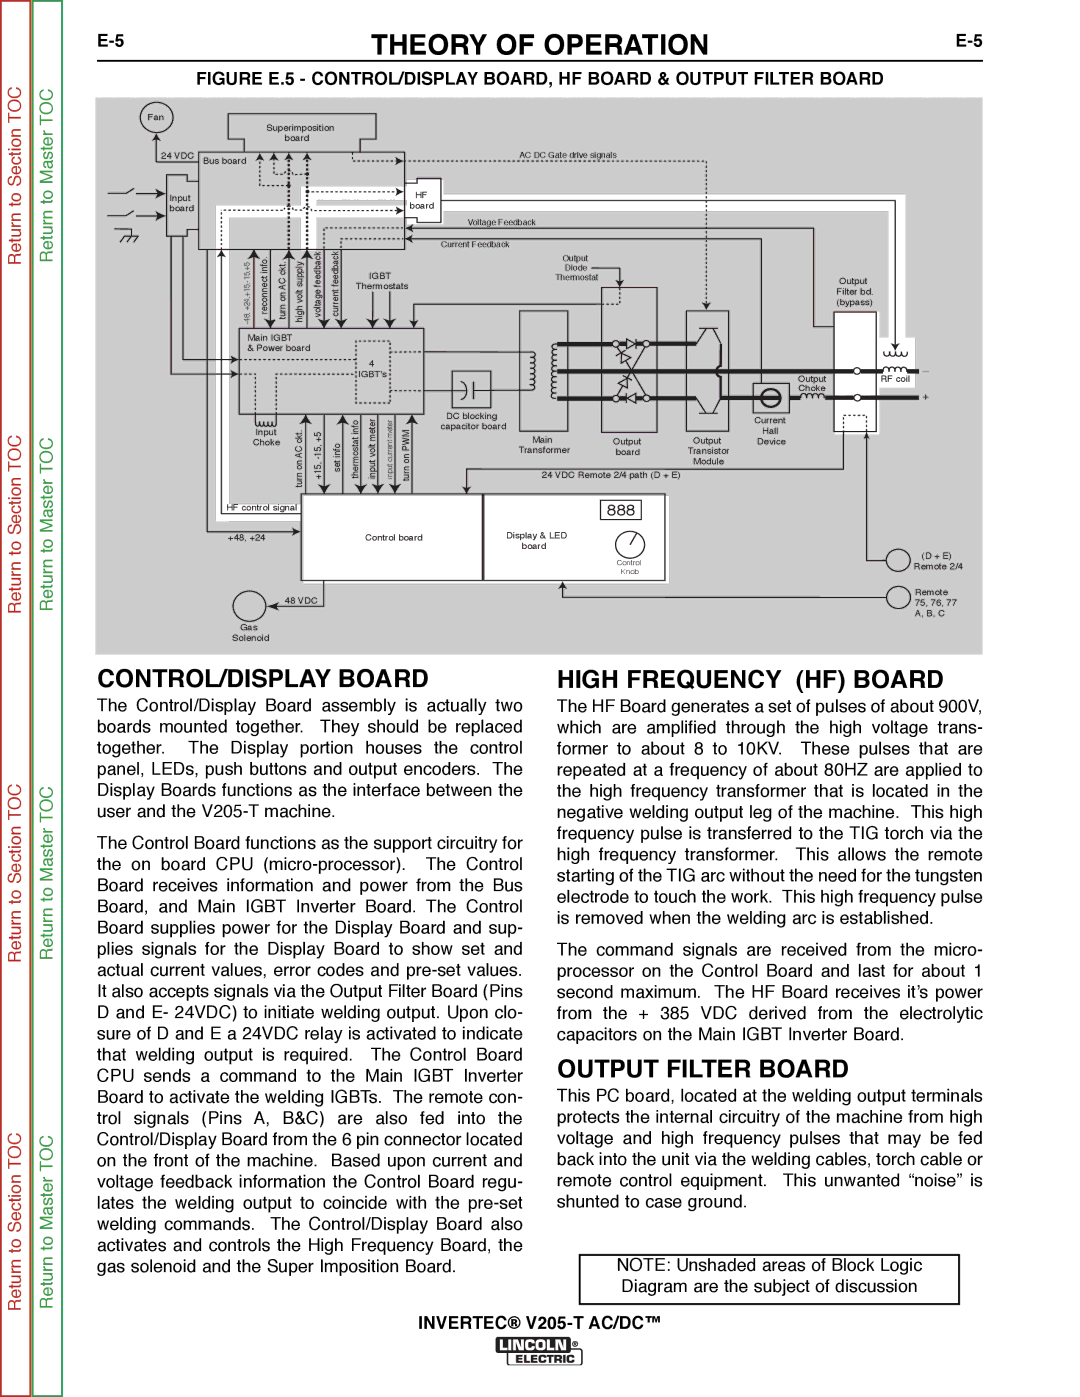 Lincoln Electric SVM161-A service manual CONTROL/DISPLAY Board, High Frequency HF Board, Output Filter Board 